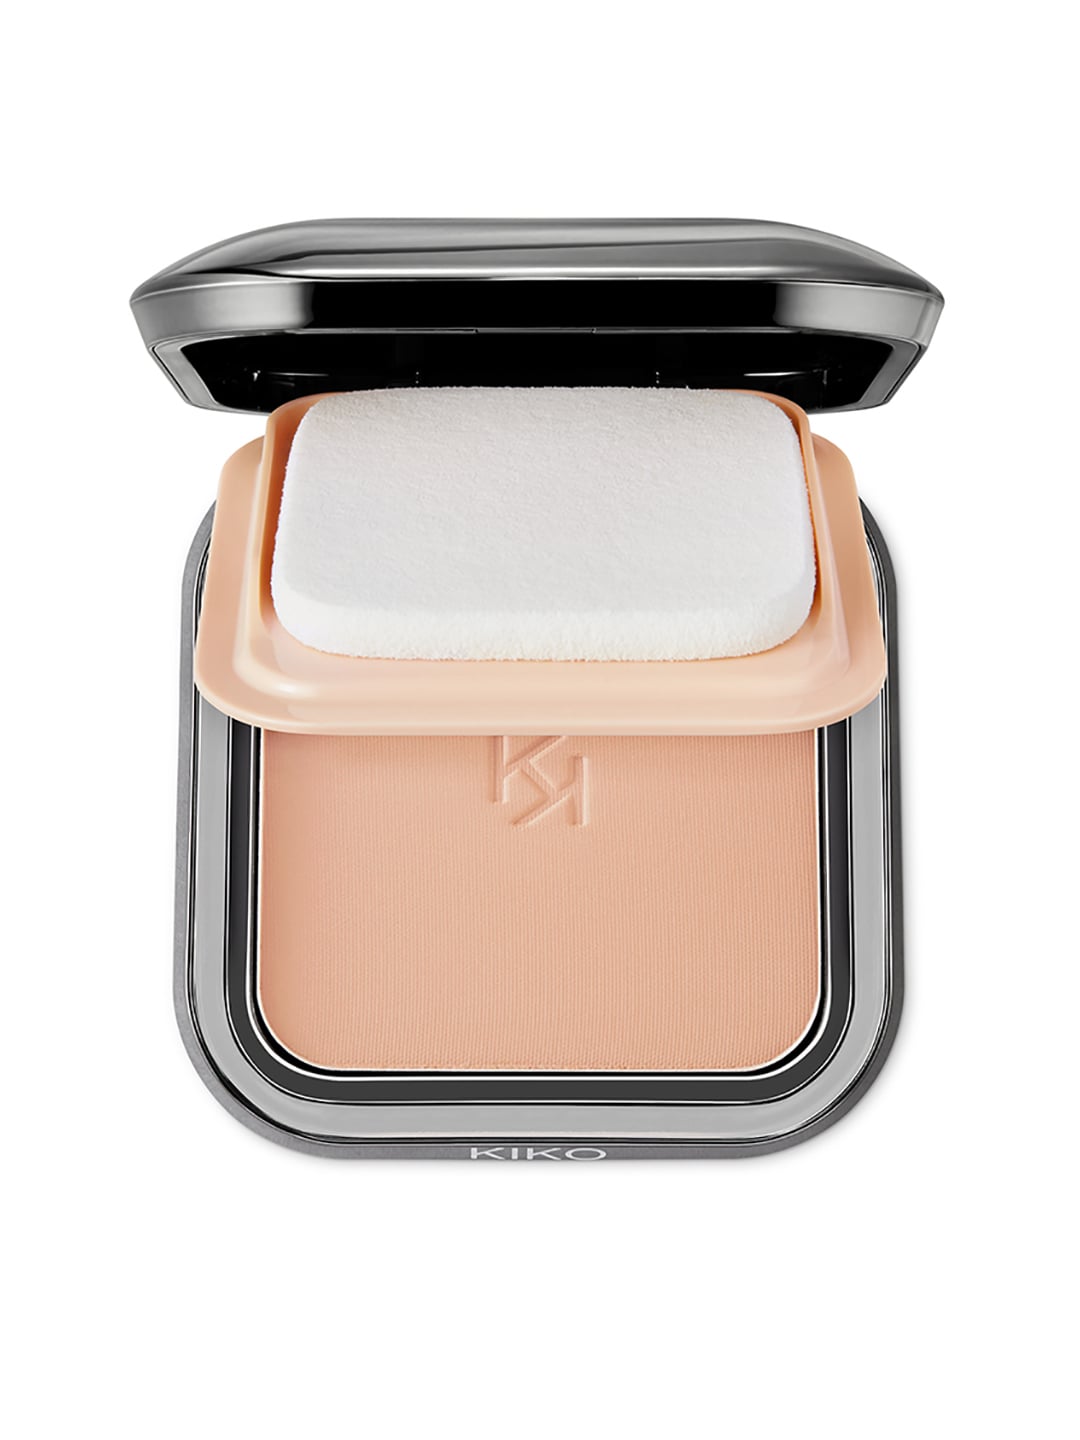 KIKO MILANO Weightless Perfection SPF 30 Wet and Dry Powder Foundation WR50 Price in India